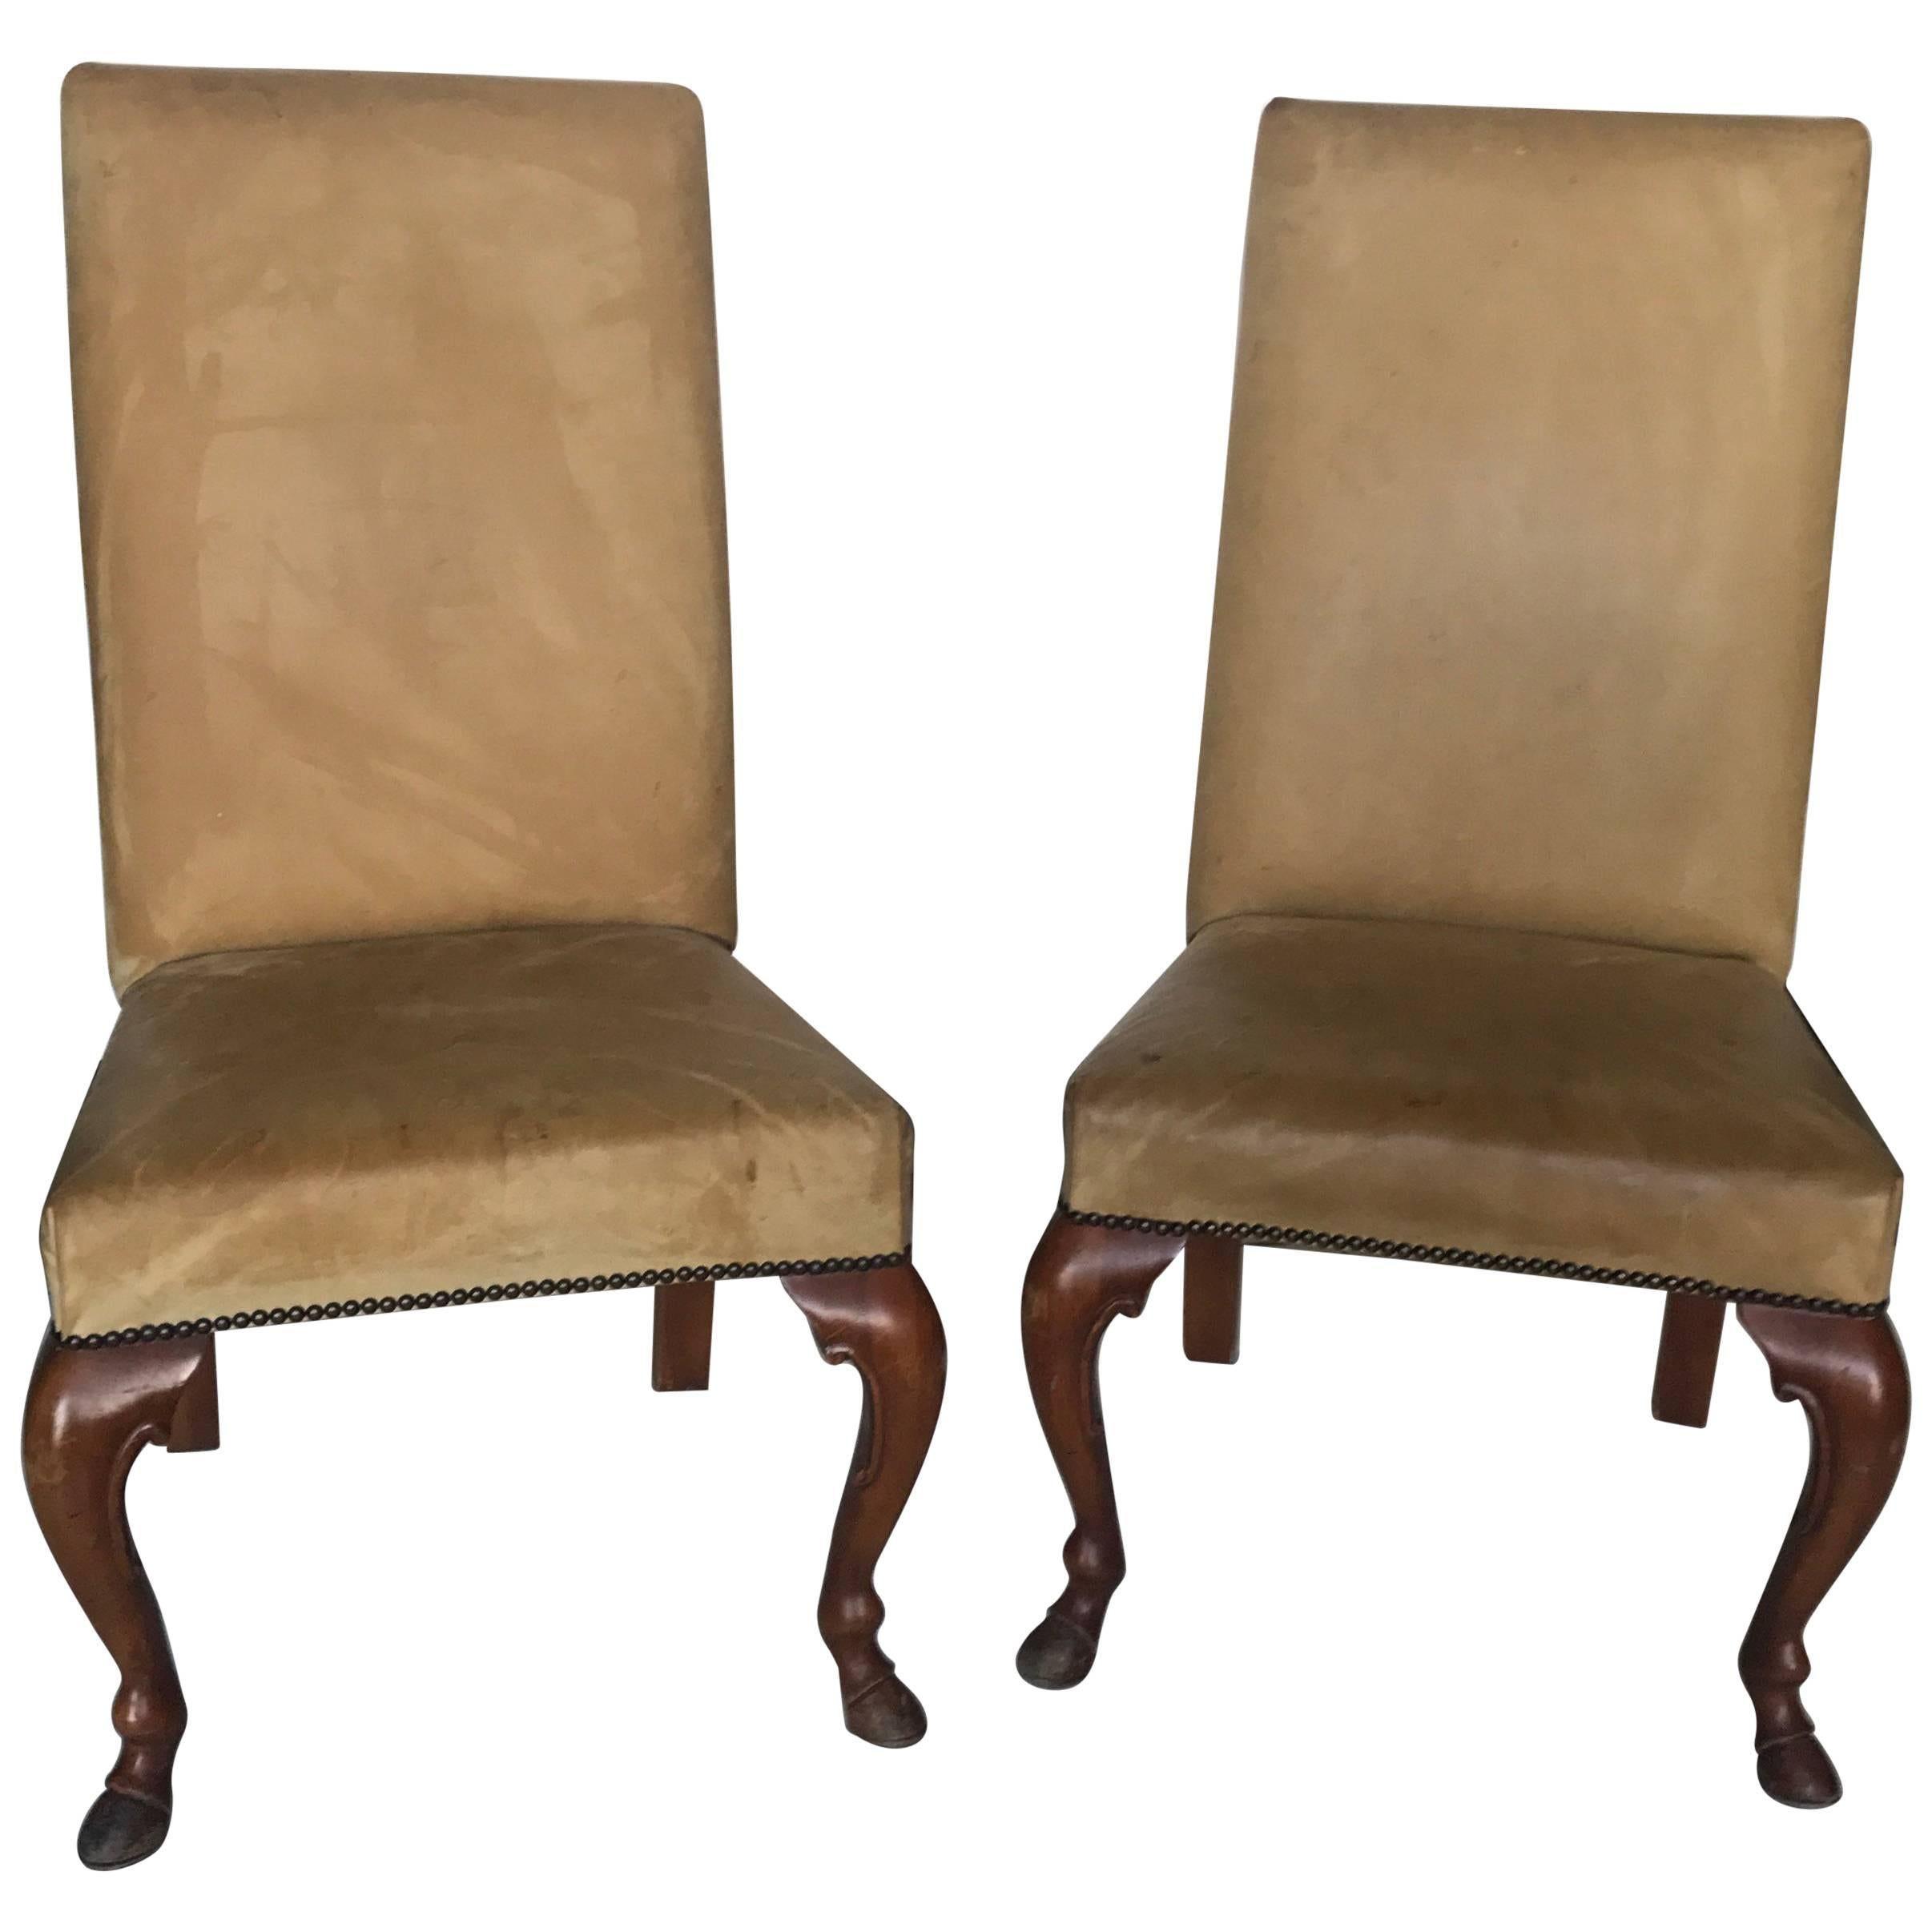 Pear of Ralph Lauren Chairs in Leather, Labelled